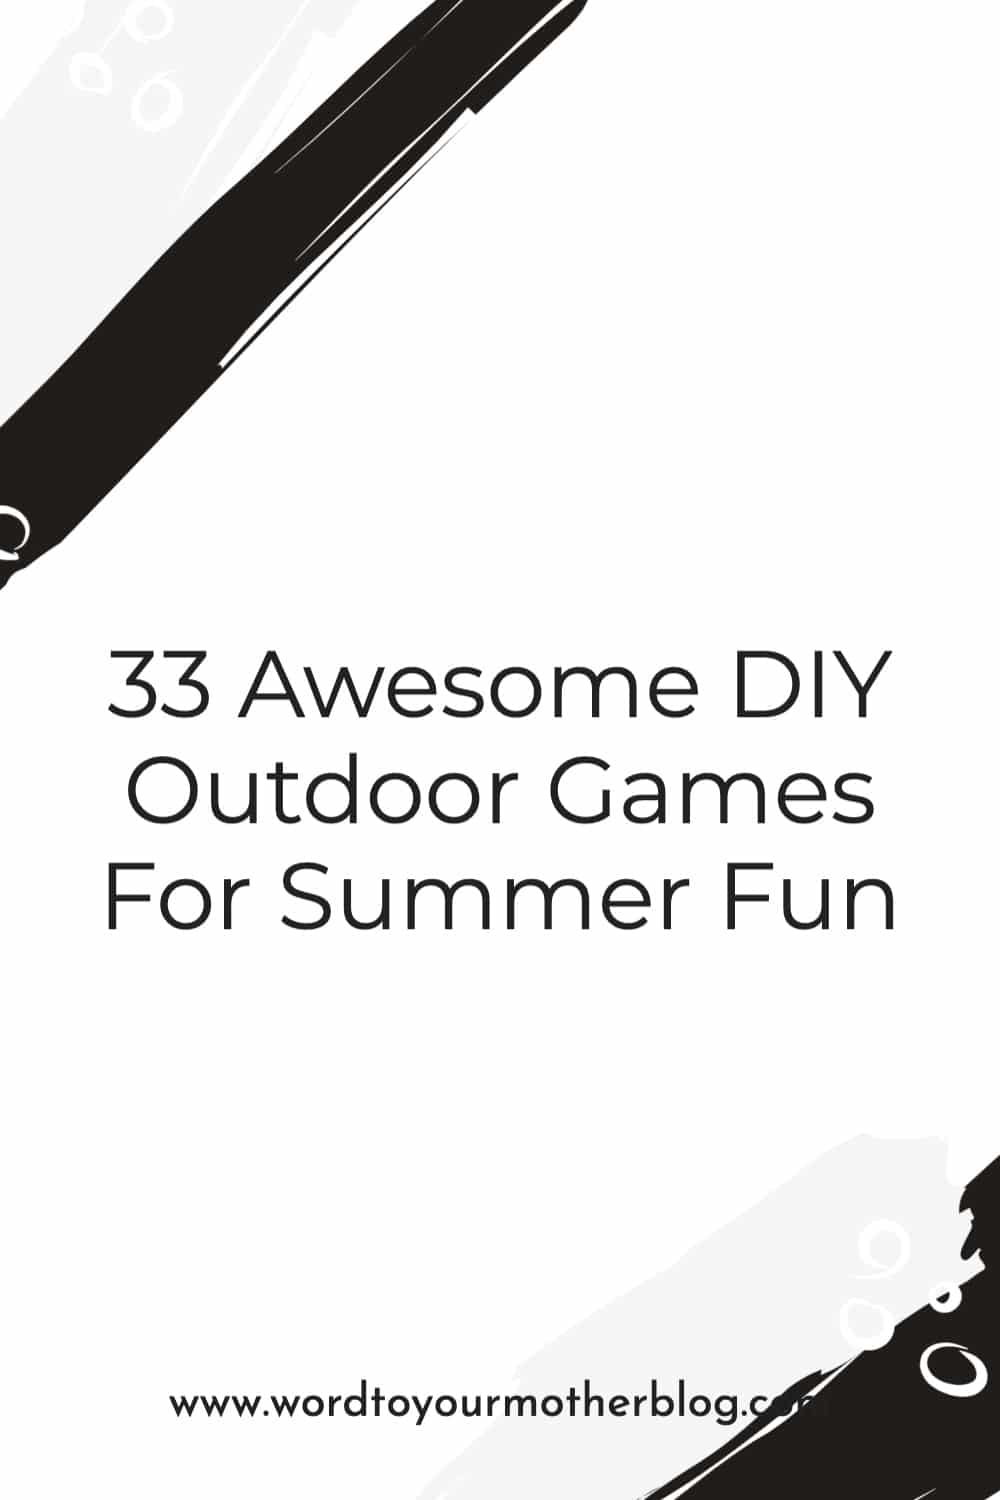 33 Awesome Diy Outdoor Games For Summer Fun